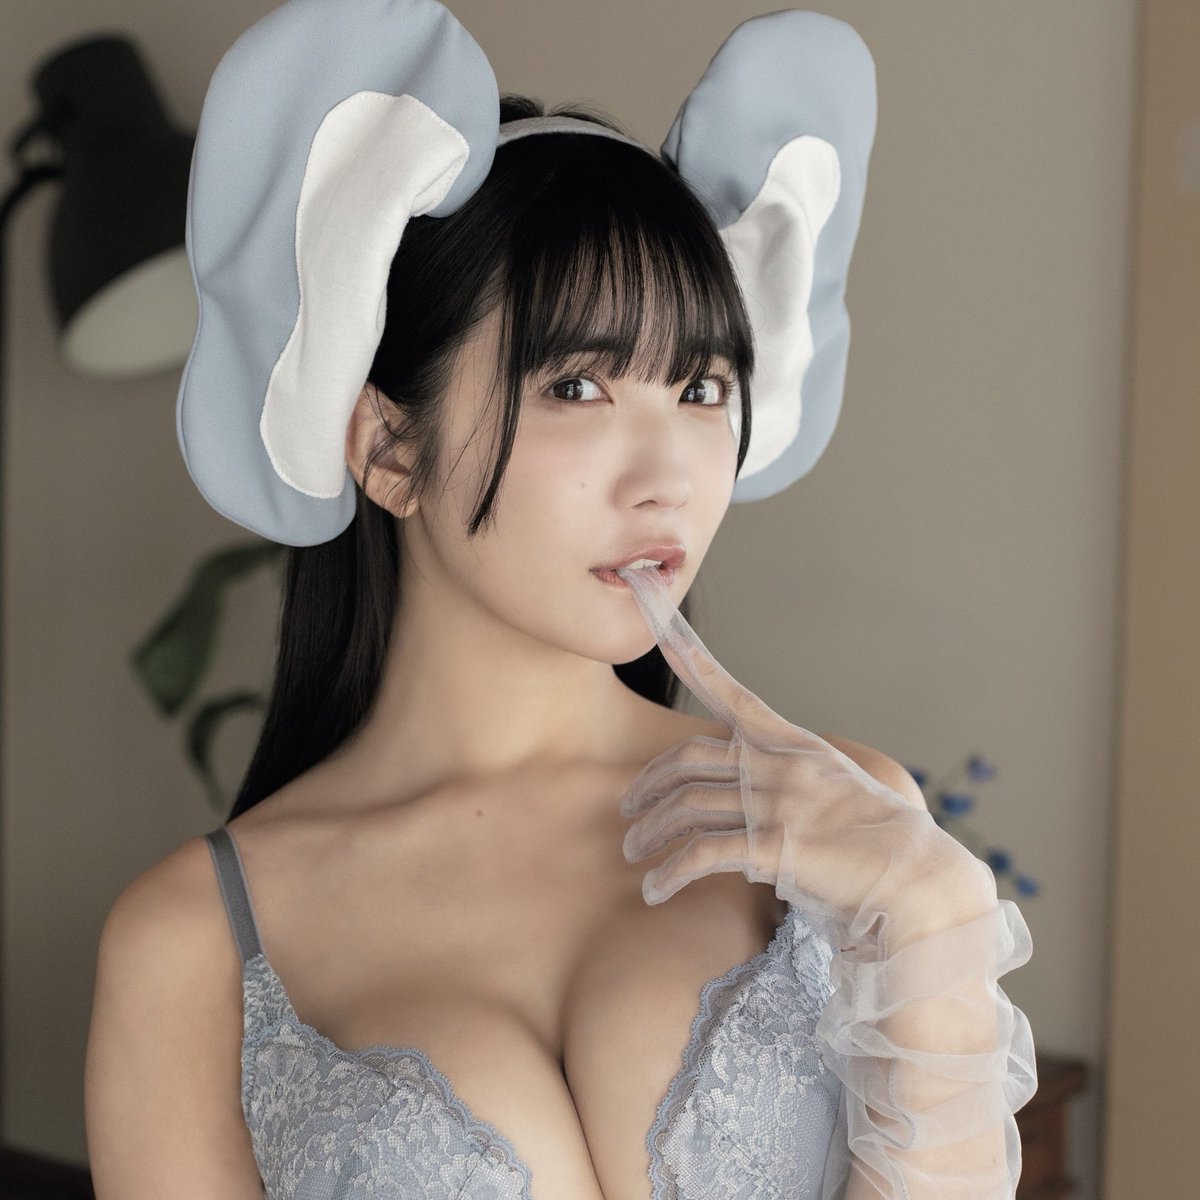 🤖 In the 7th installment of Zeroichi Zoo, 01familia's regular corner inside the ENTAME magazine, #2i2's Amau Kisumi becomes a sexy elephant 🐘

You can purchase it here: ebookstore.sony.jp/item/LT0002025…

#AmauKisumi #天羽希純 
#ゼロイチ動物園 #月刊エンタメ